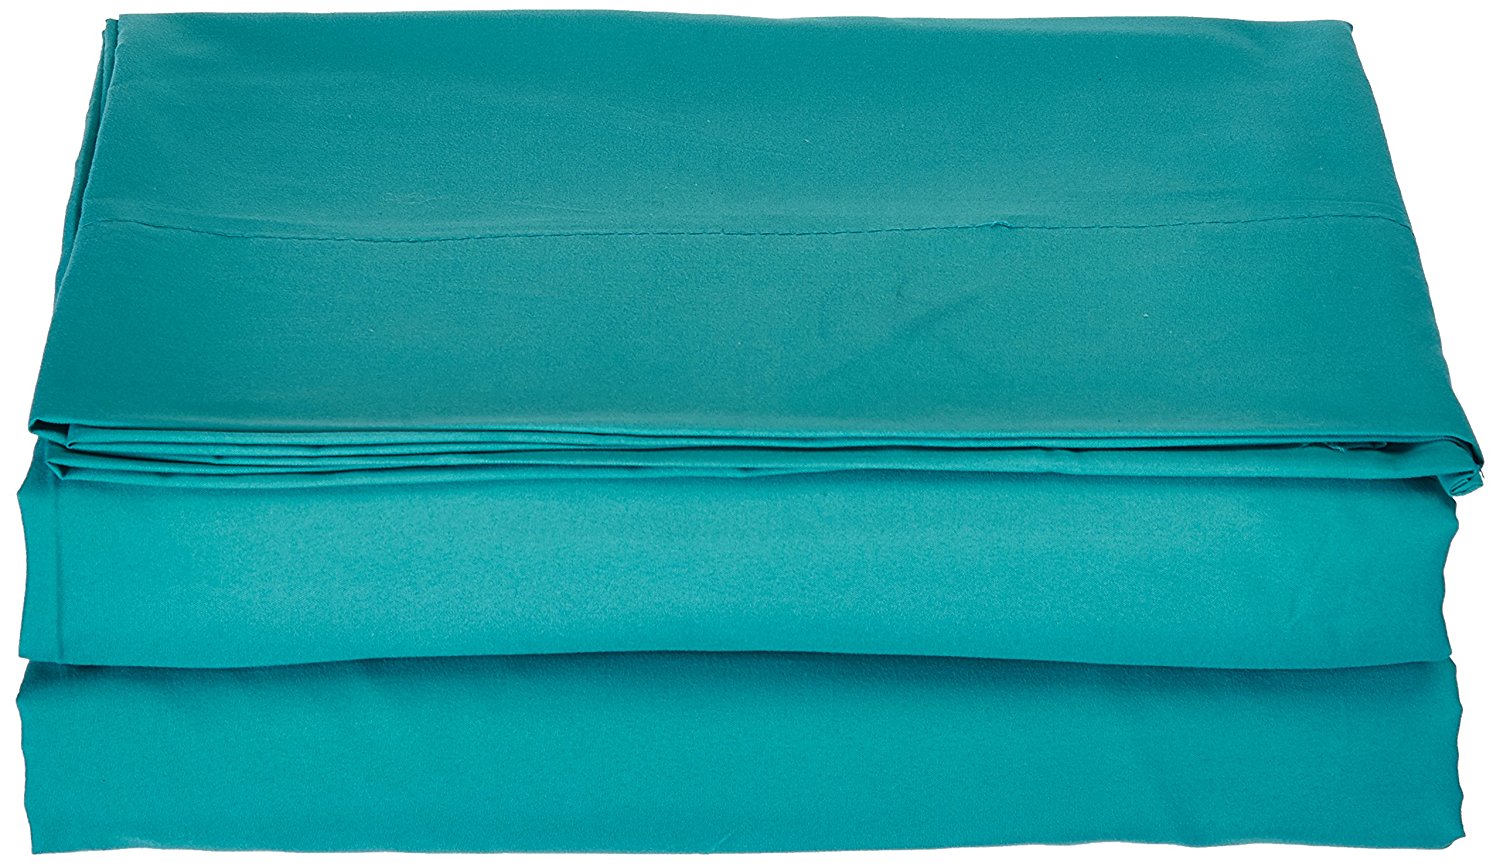 Luxury Fitted Sheet on Amazon! - HIGHEST QUALITY Elegant Comfort Wrinkle-Free 1500 Thread Count Egyptian Quality 1-Piece Fitted Sheet, Twin/Twin XL Size, Turquoise